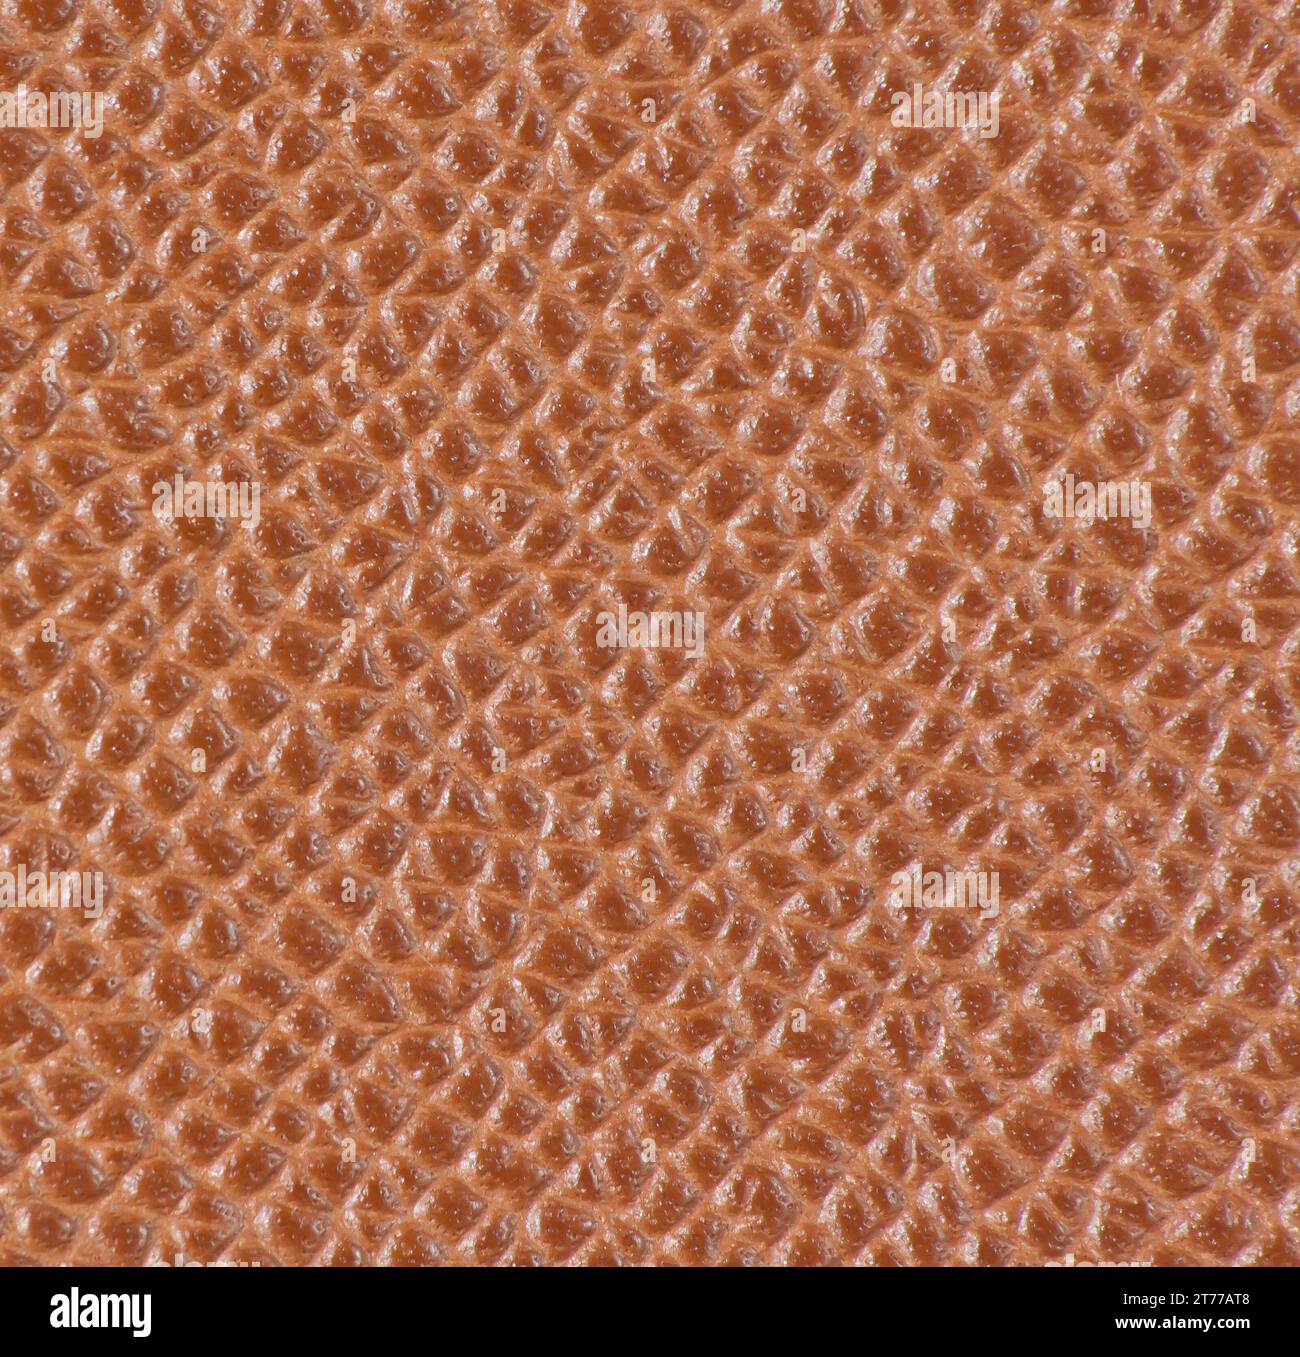 light brown leather texture for background Stock Photo